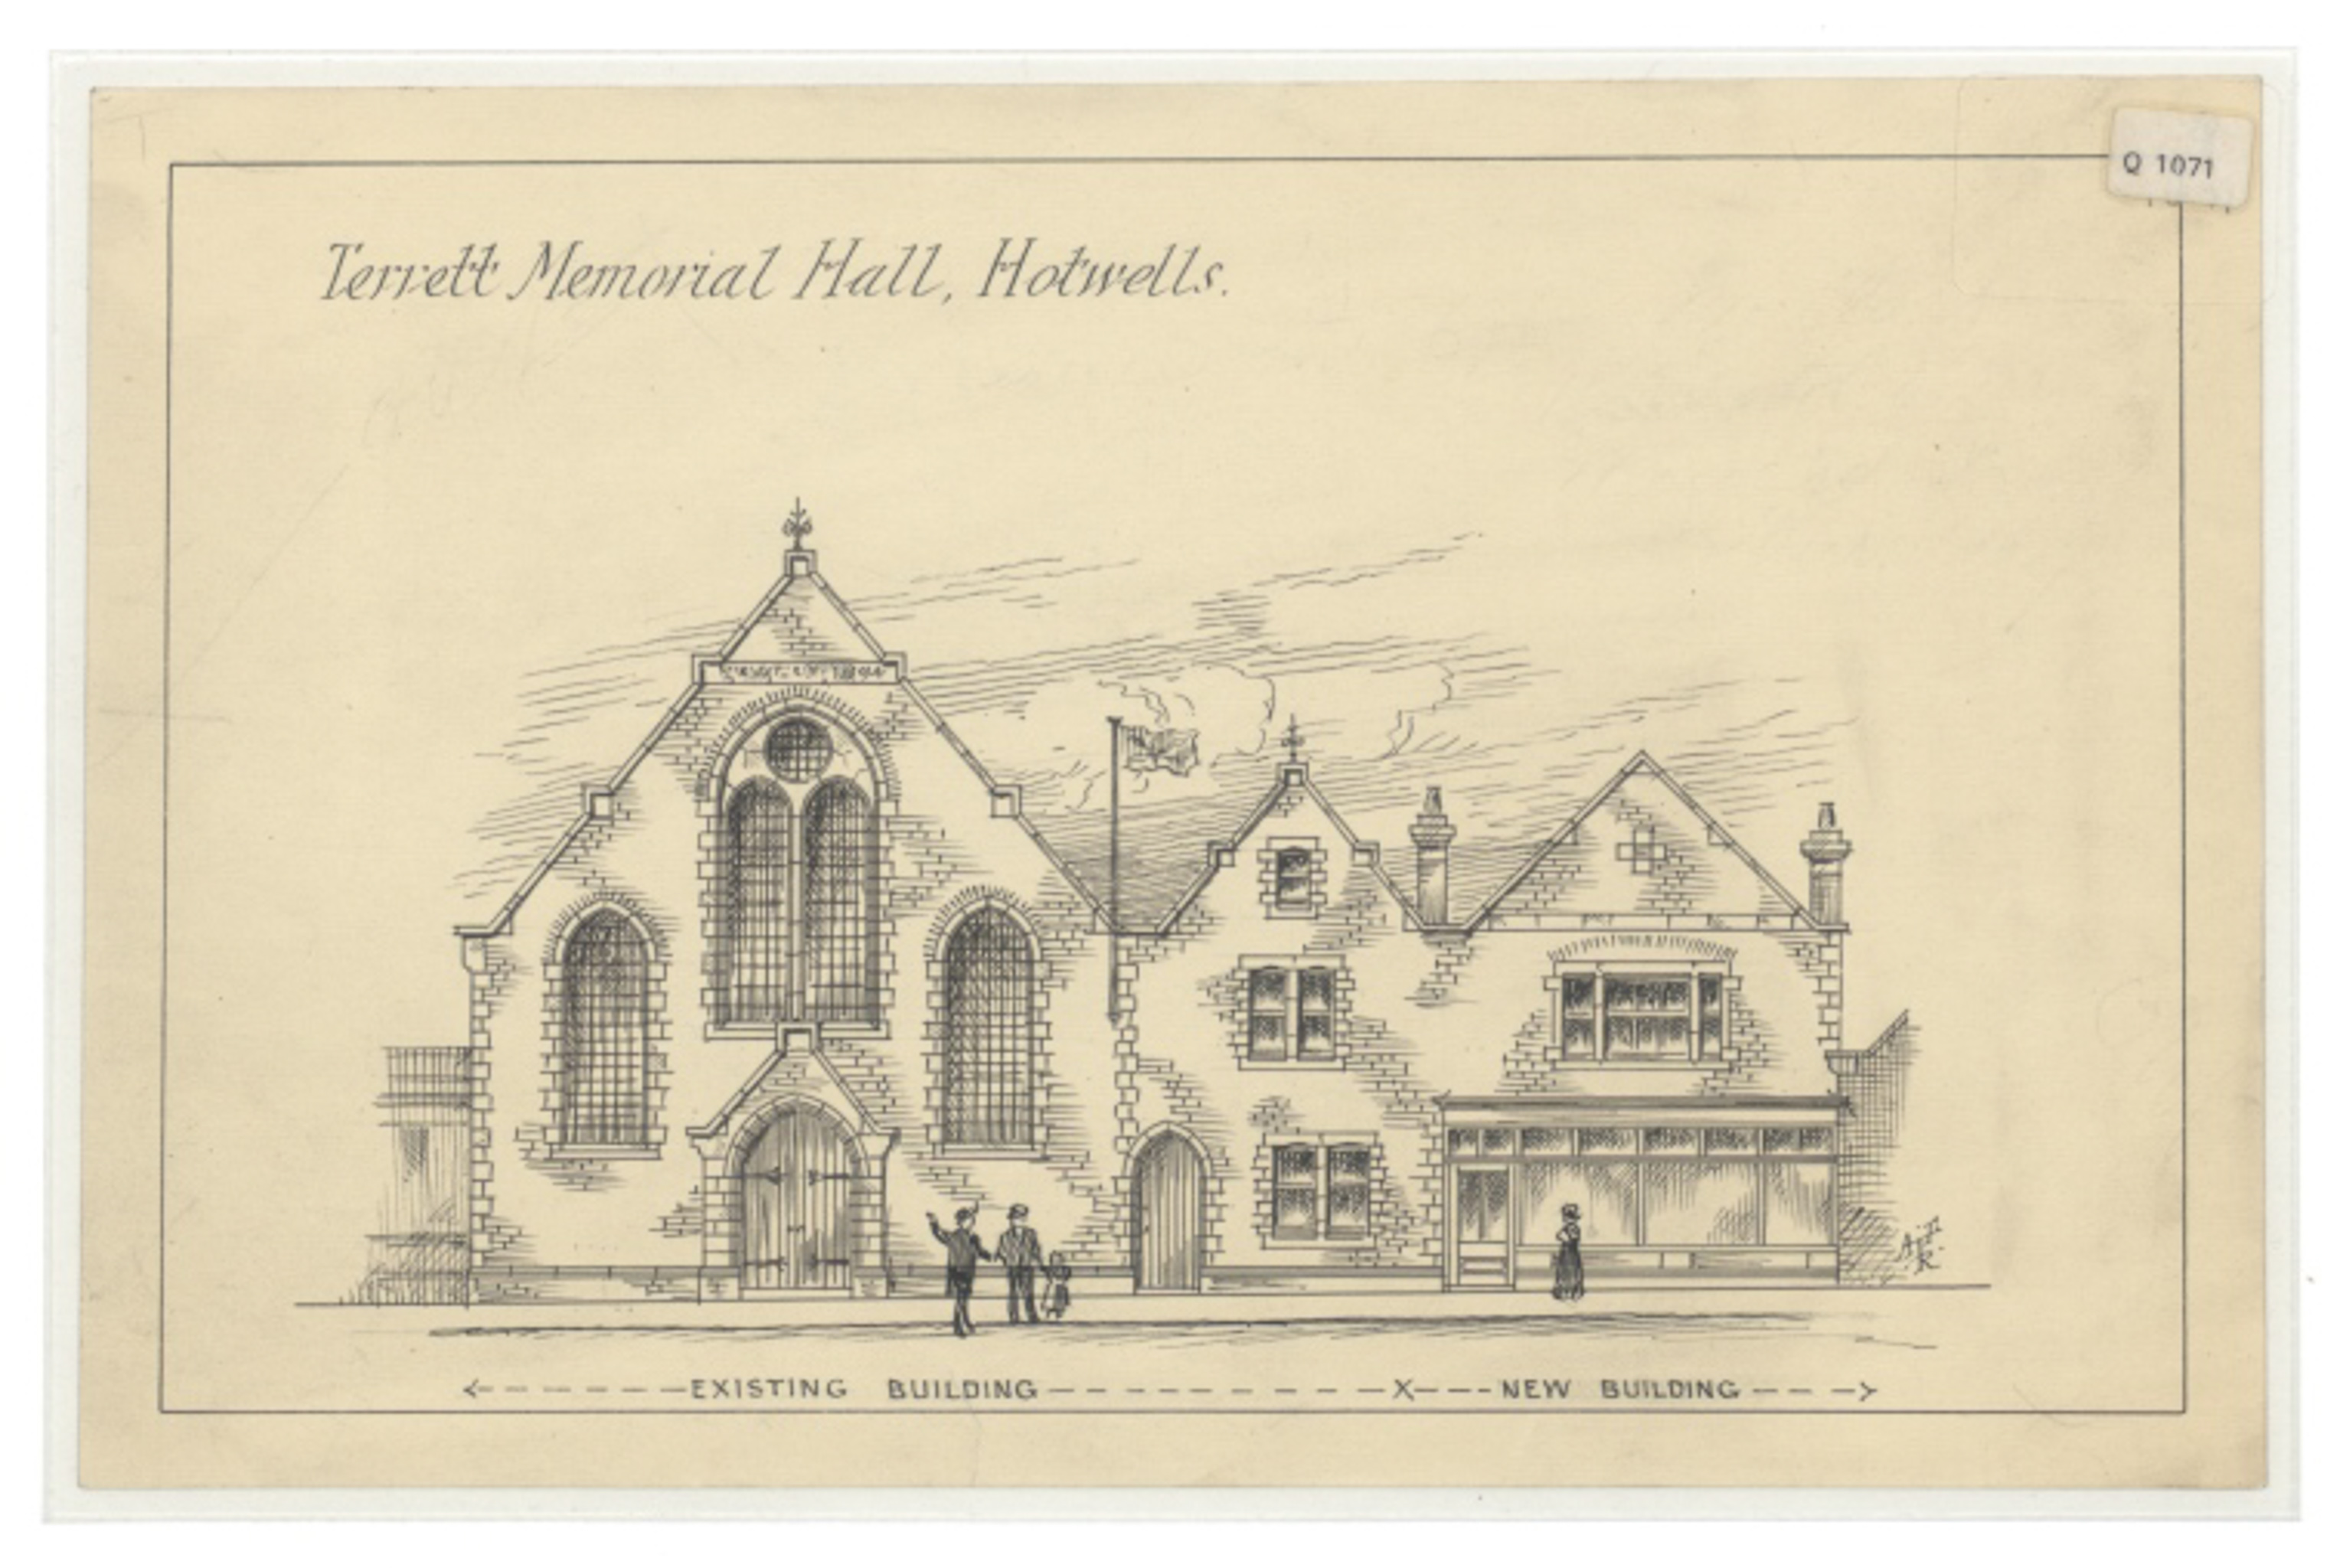 Terrett Memorial Hall Loxton Drawings
The Loxton Collection, part of Bristol Library's Reference collection, has over  2000 pen and ink drawings that were created by Samuel Loxton in th...